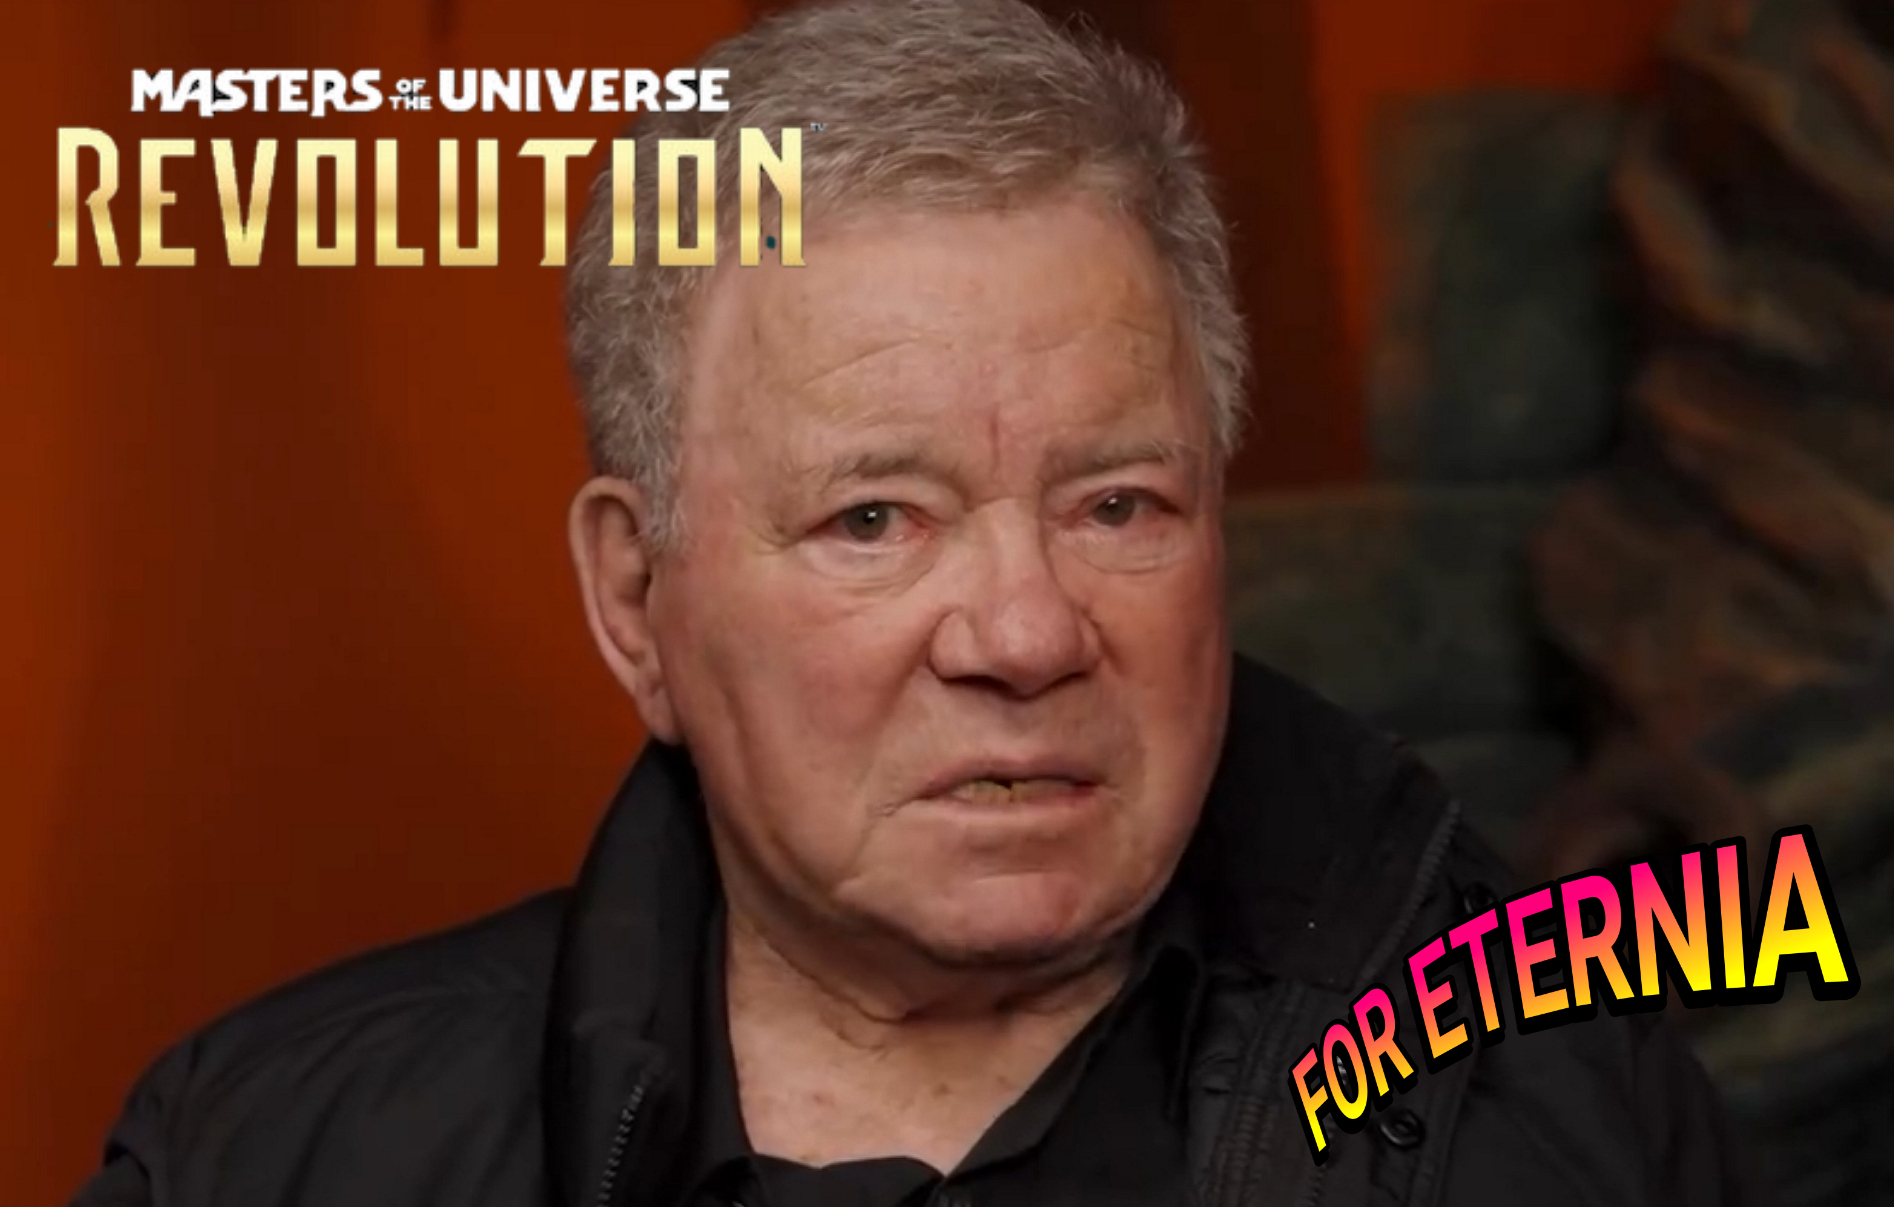 Watch actor William Shatner answer (humorously) why he decided to play the role of *SPOILER* in ”Masters of the Universe: Revolution”